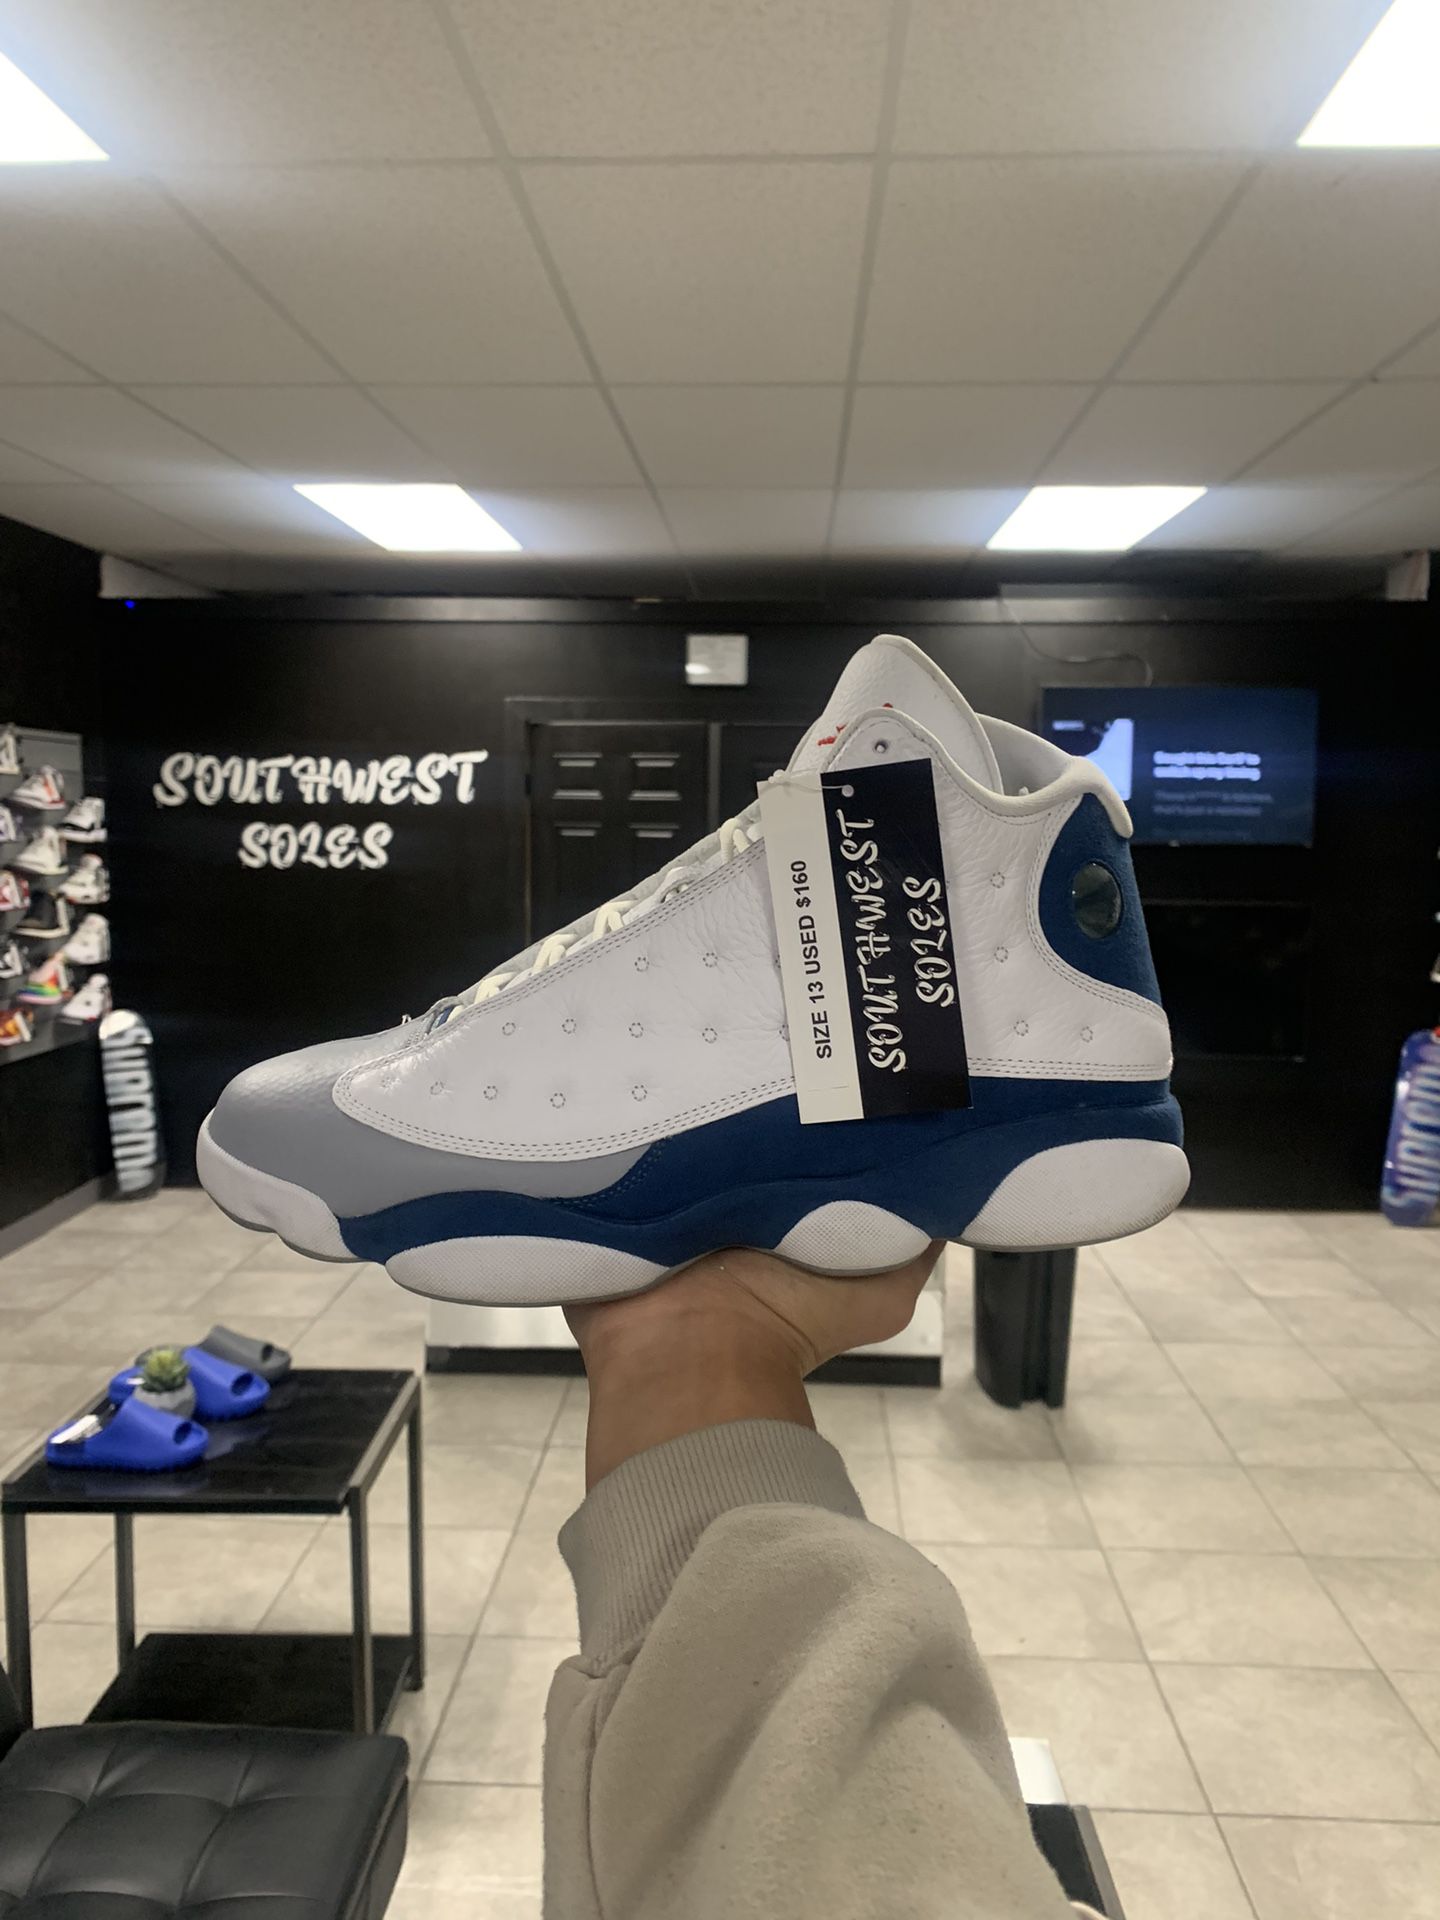 Jordan 13 French Blue Size 13 Available In Store!